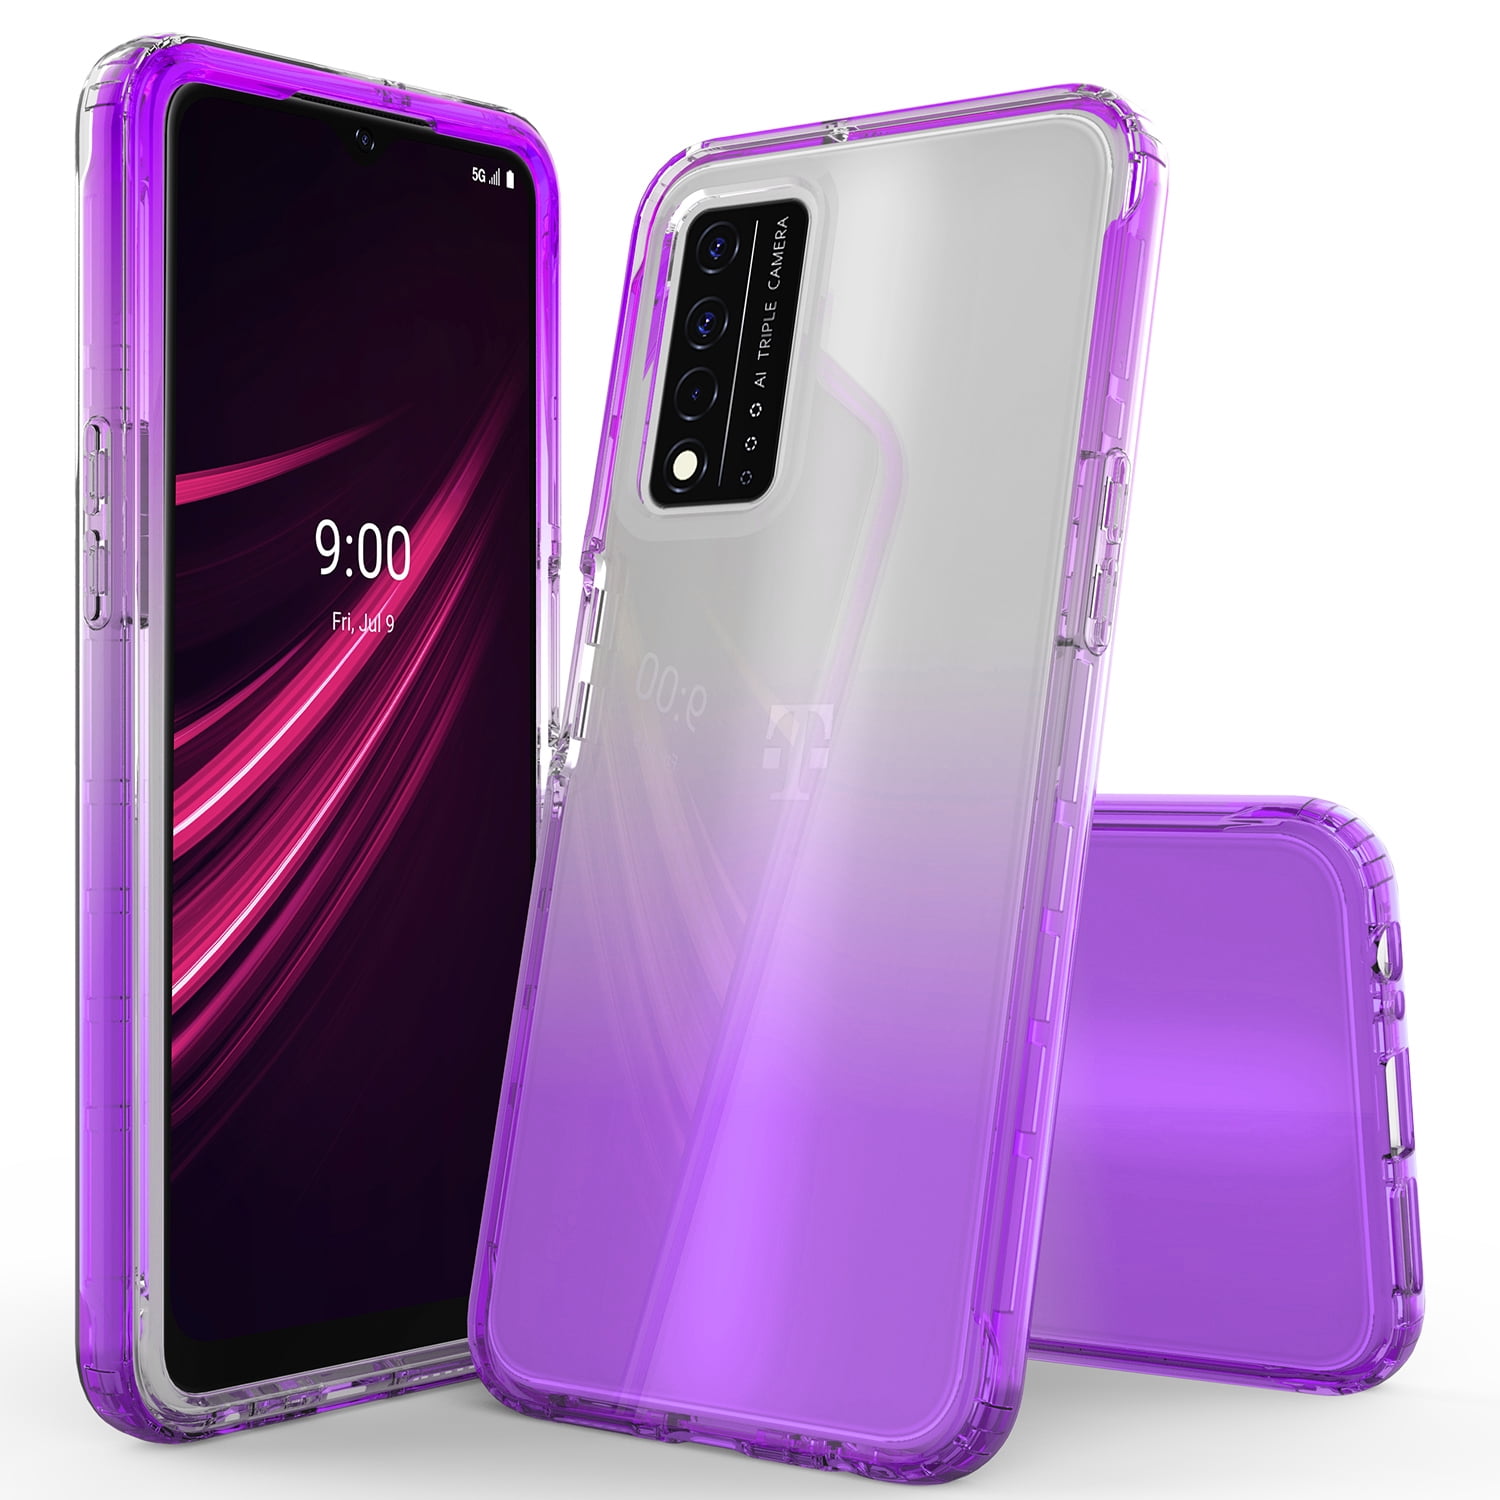 Gradient Color Well-protected Phone Case for Realme GT2 Pro, Tempered Glass  + PC + TPU Slim Lightweight Hybrid Cover - Gradient Purple Wholesale